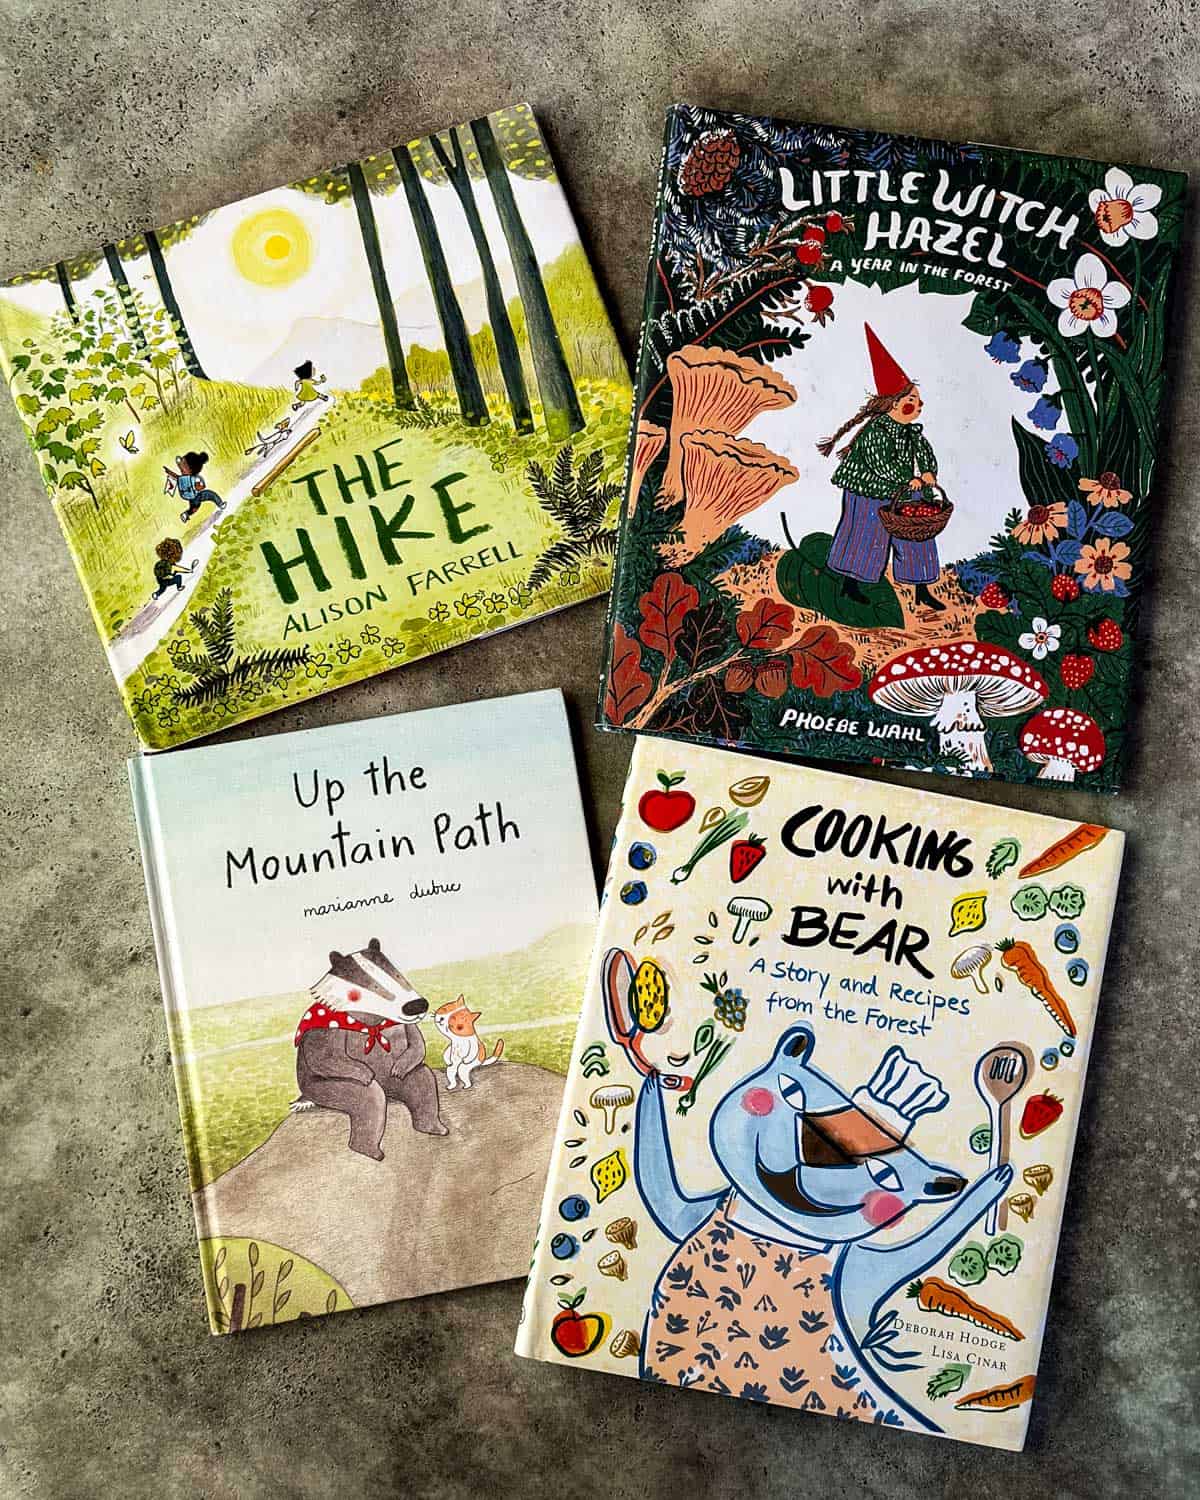 4 kids foraging storybooks laid face up on a grey surface, all with beautiful illustrations. 